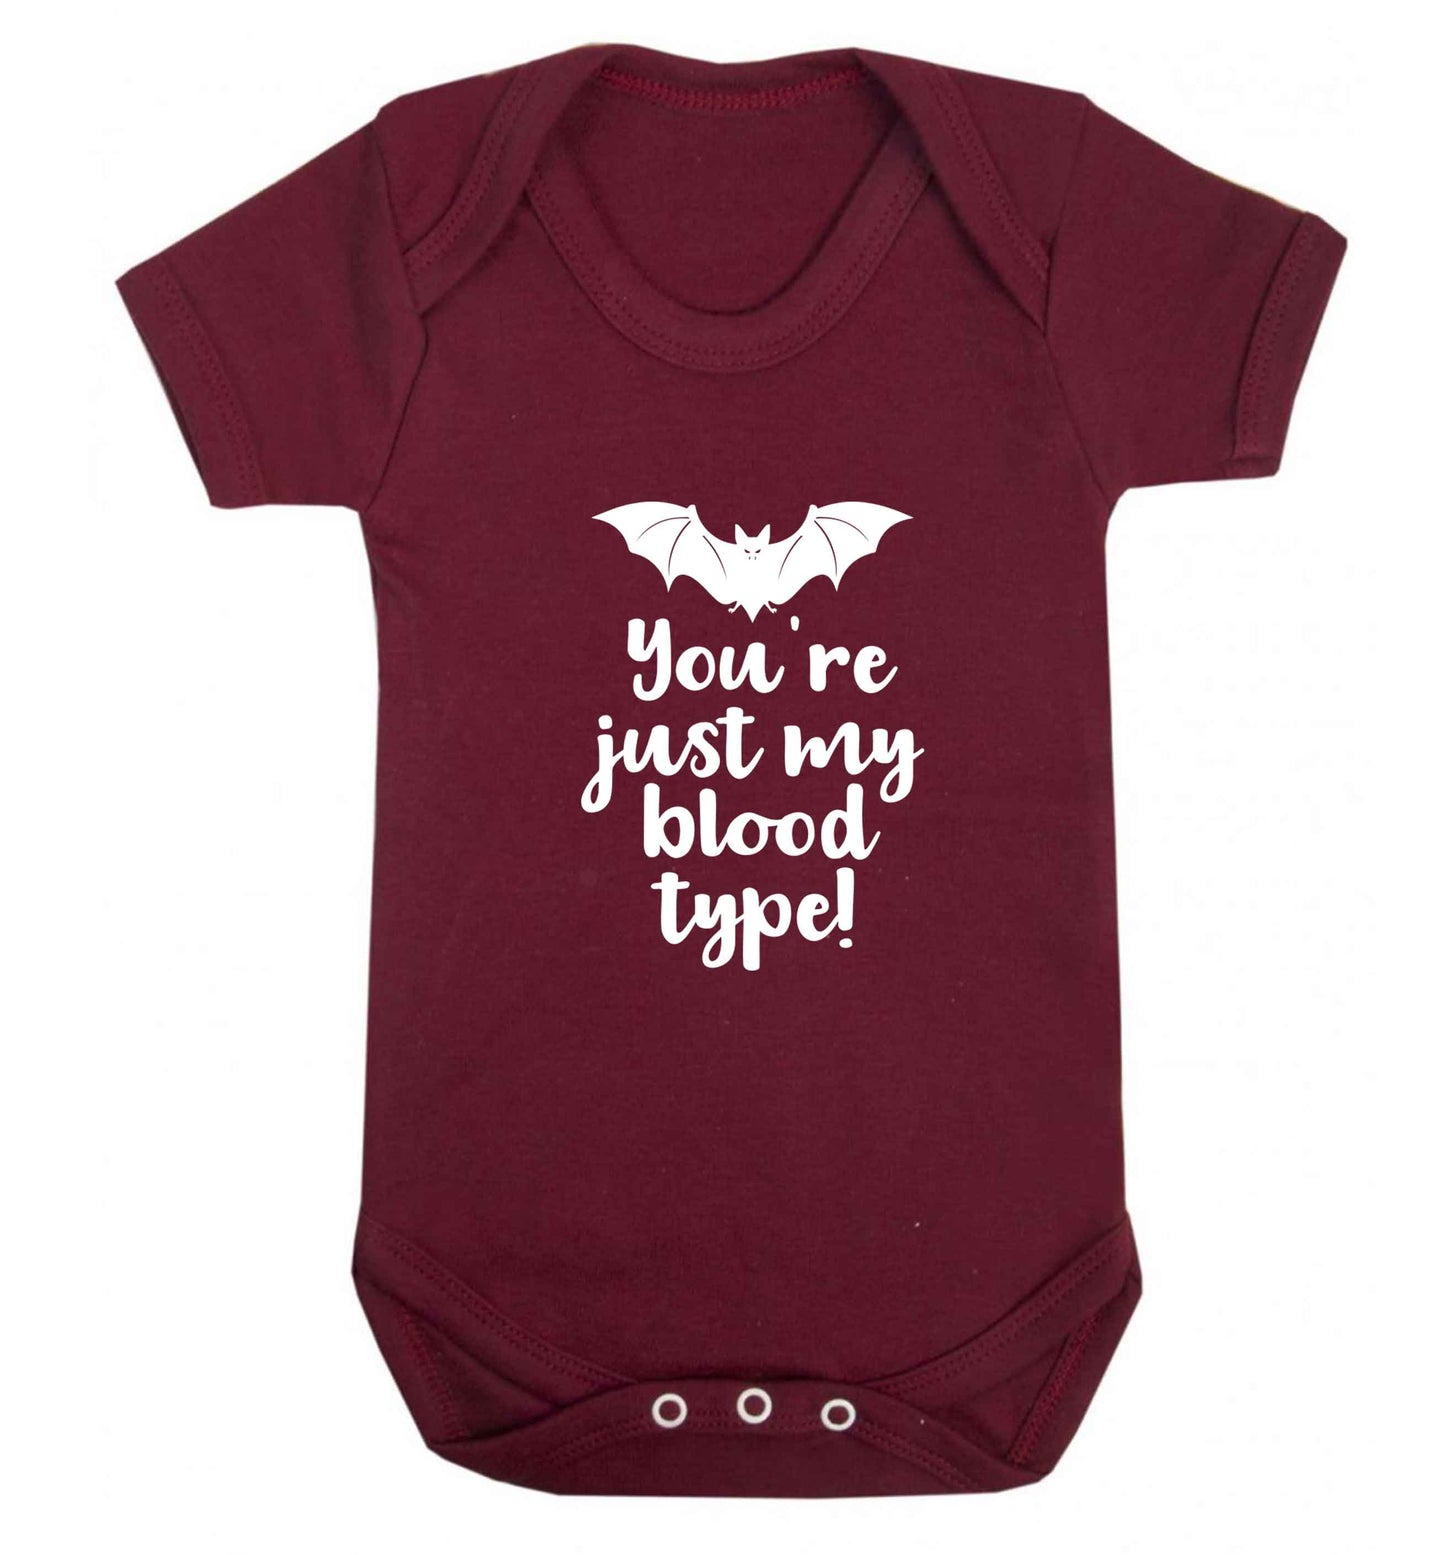 You're just my blood type baby vest maroon 18-24 months